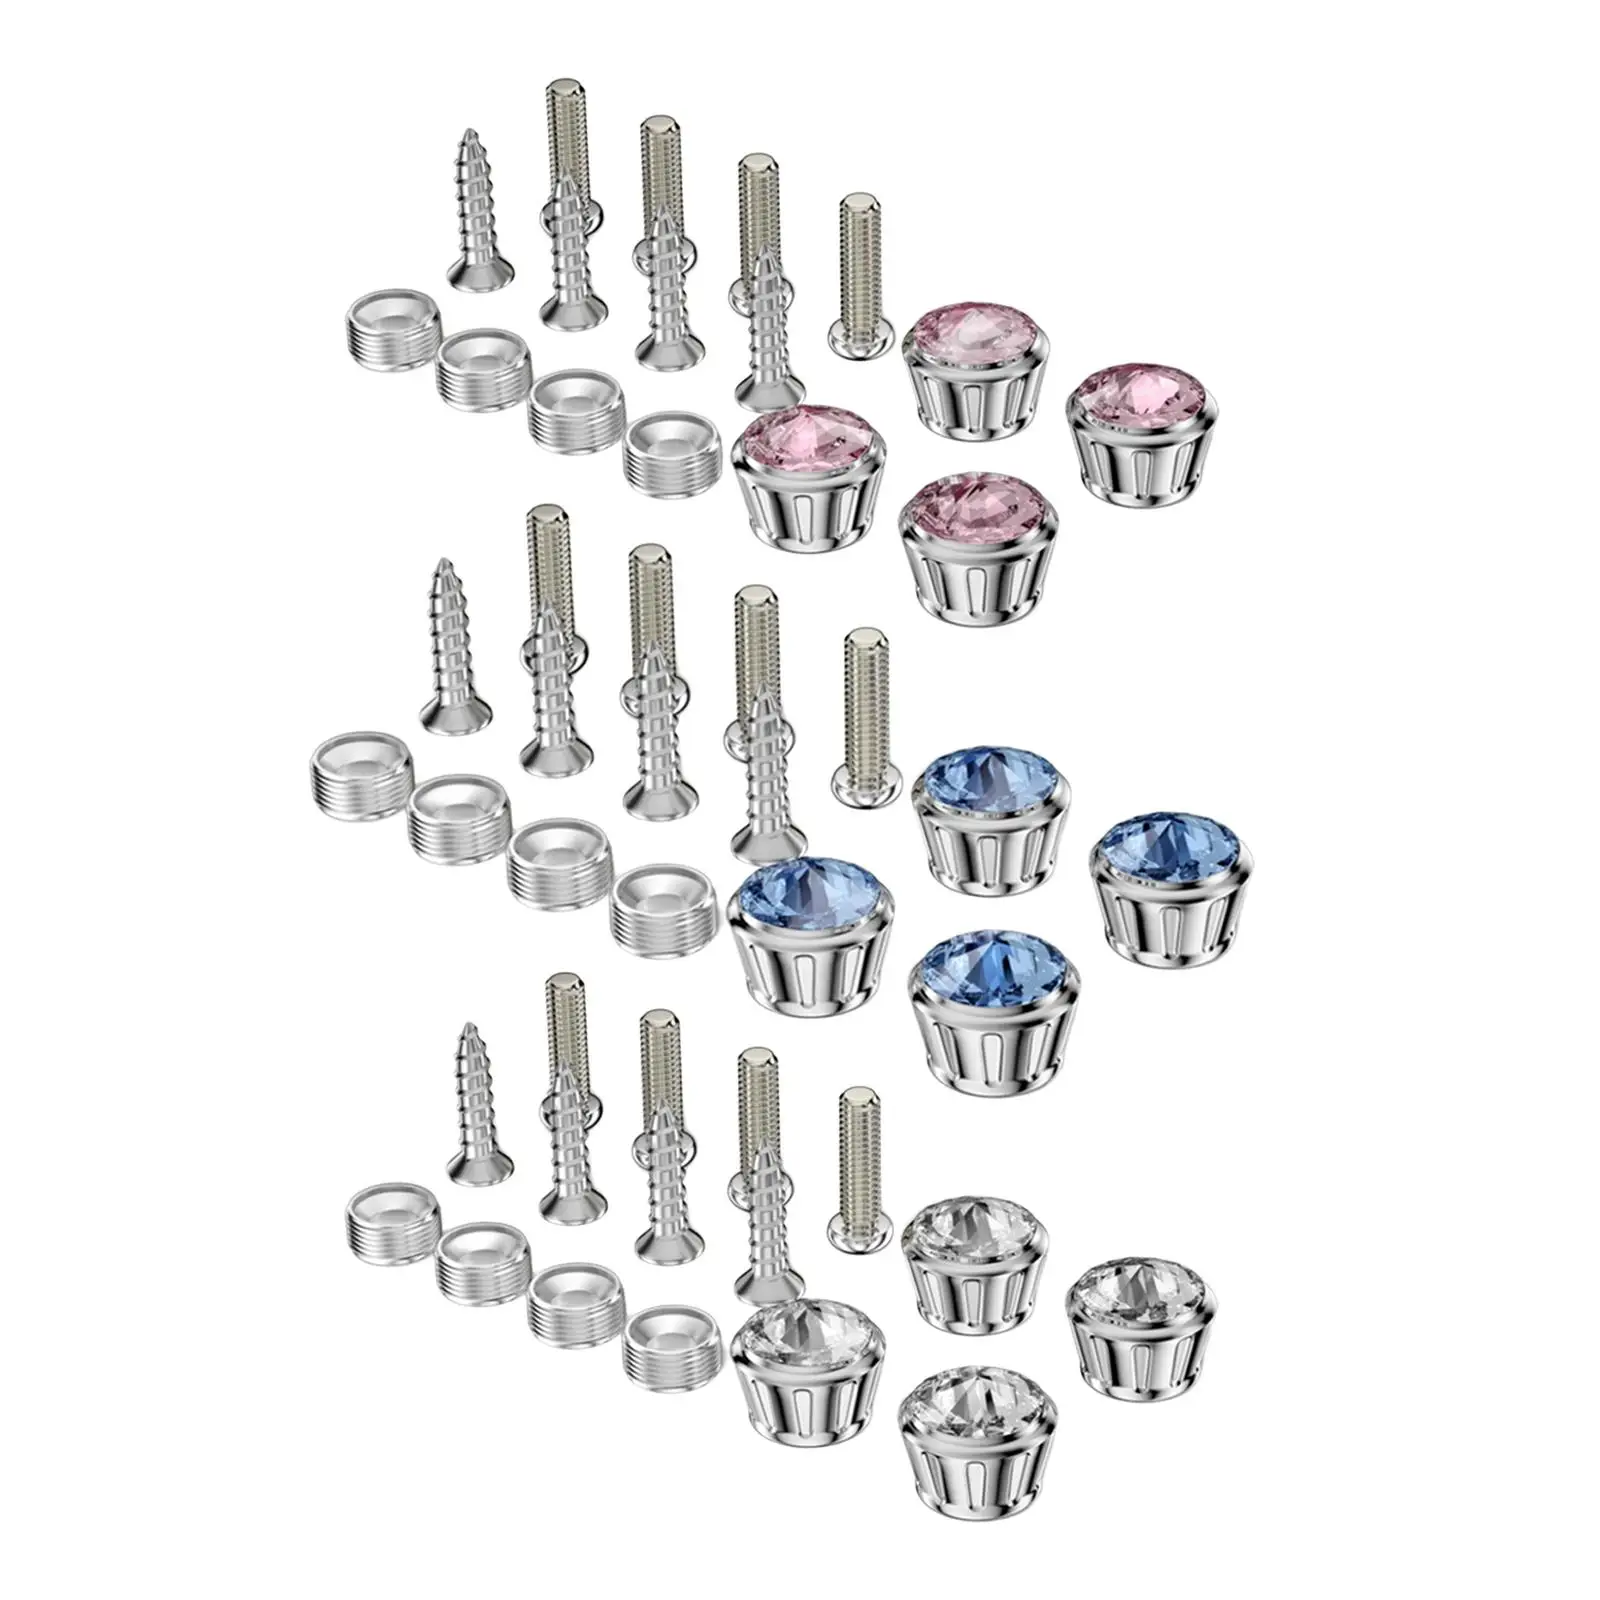 16 Pieces Car Anti Theft License Plate Screws Kit Fit for Cars Tag Frame